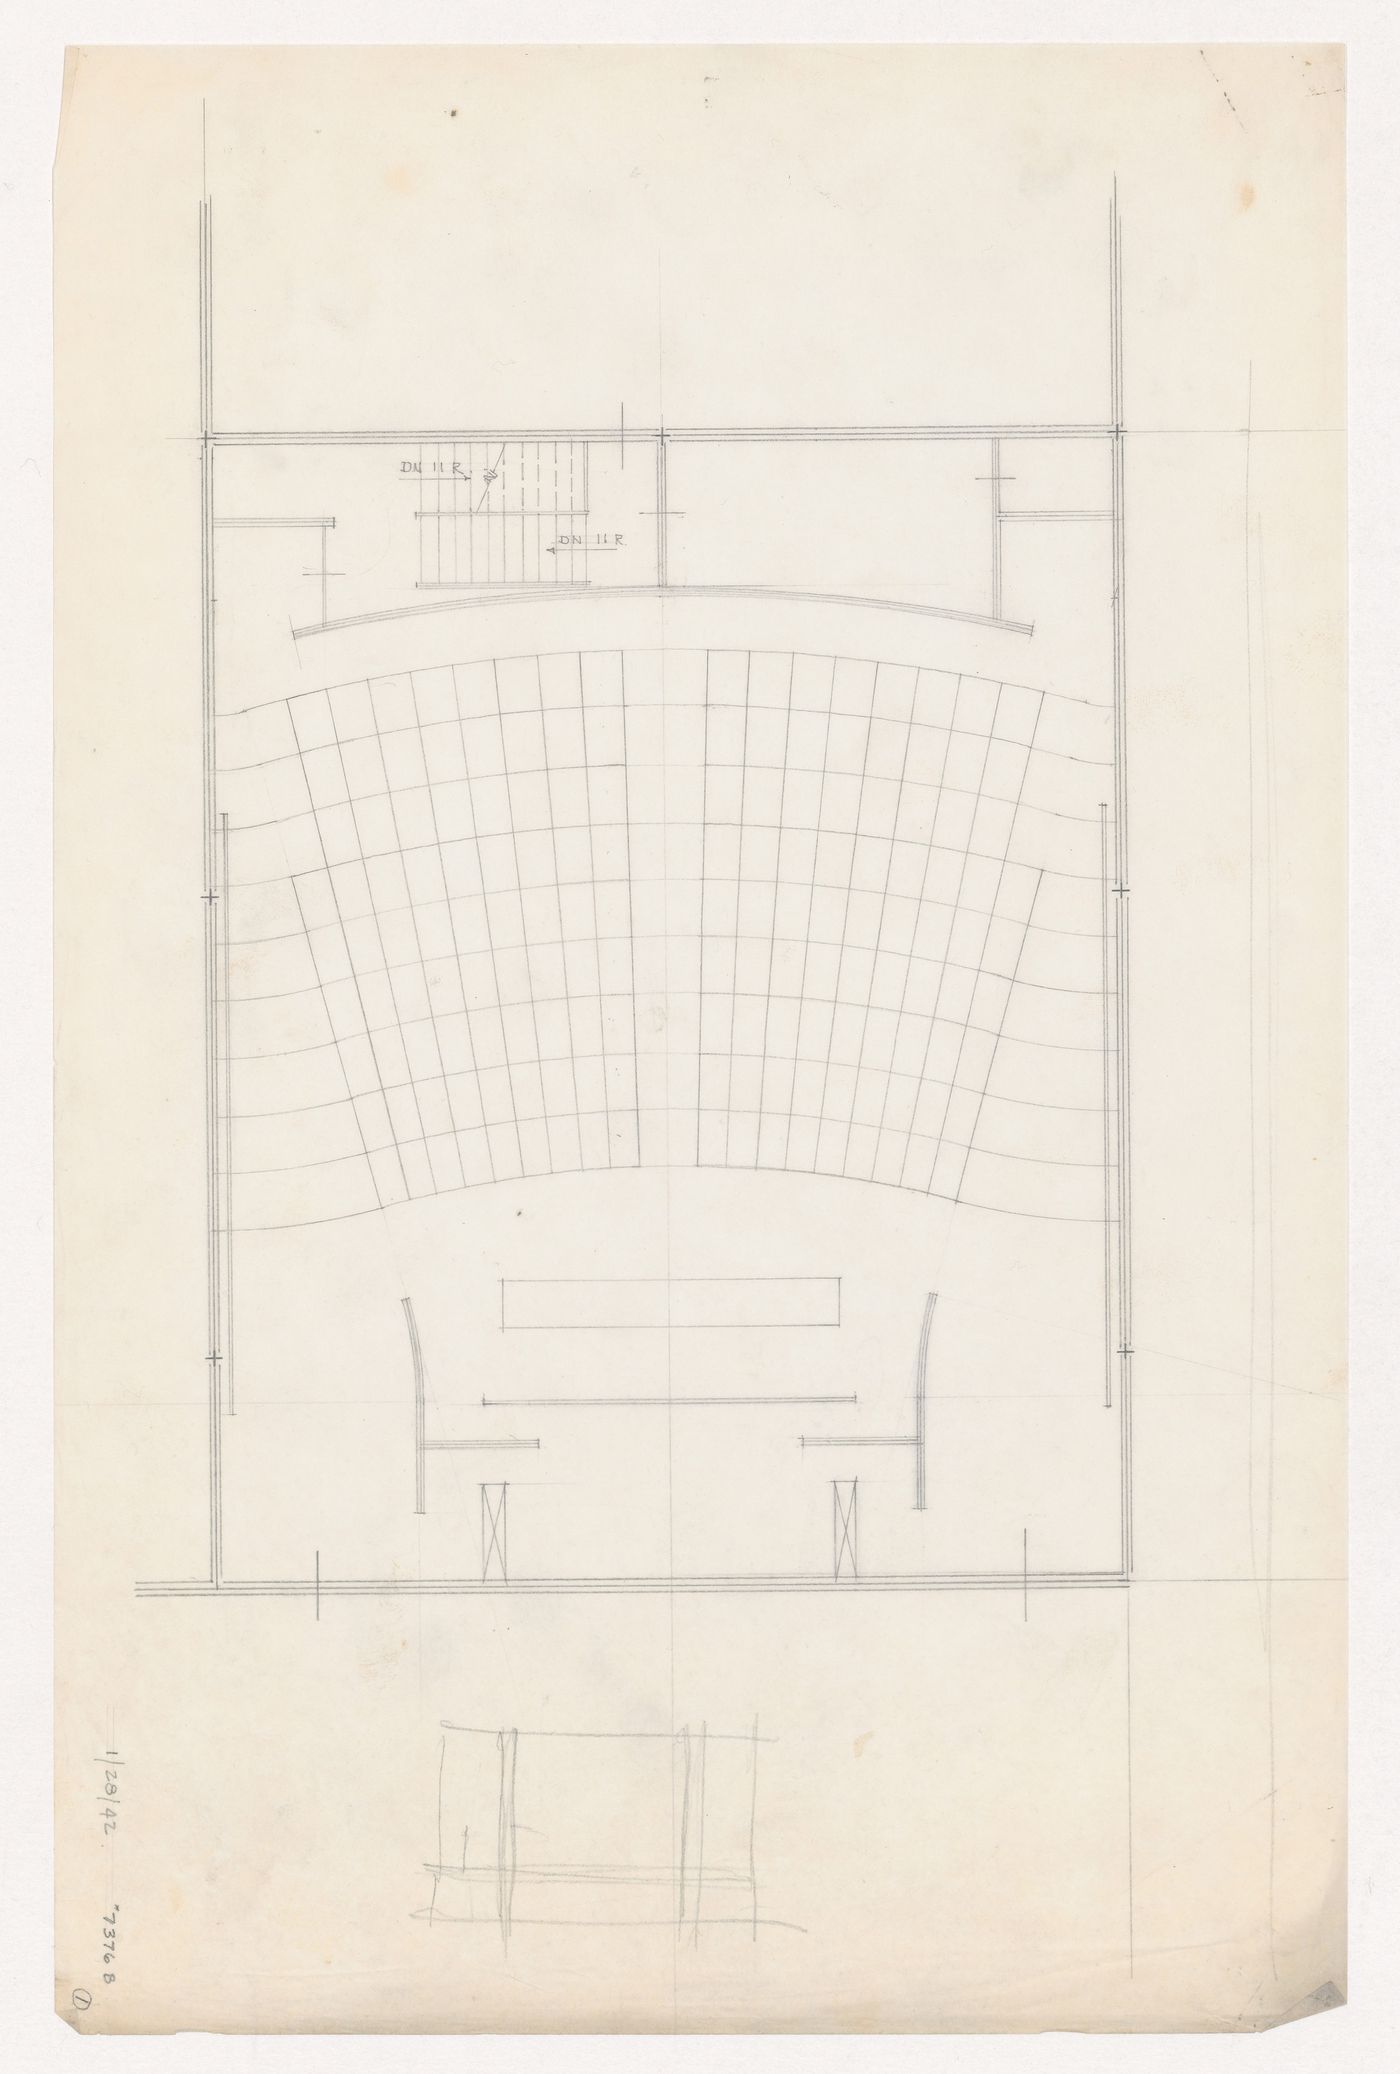 Plan for an auditorium for the Metallurgy Building, Illinois Institute of Technology, Chicago, with an unidentified sketch